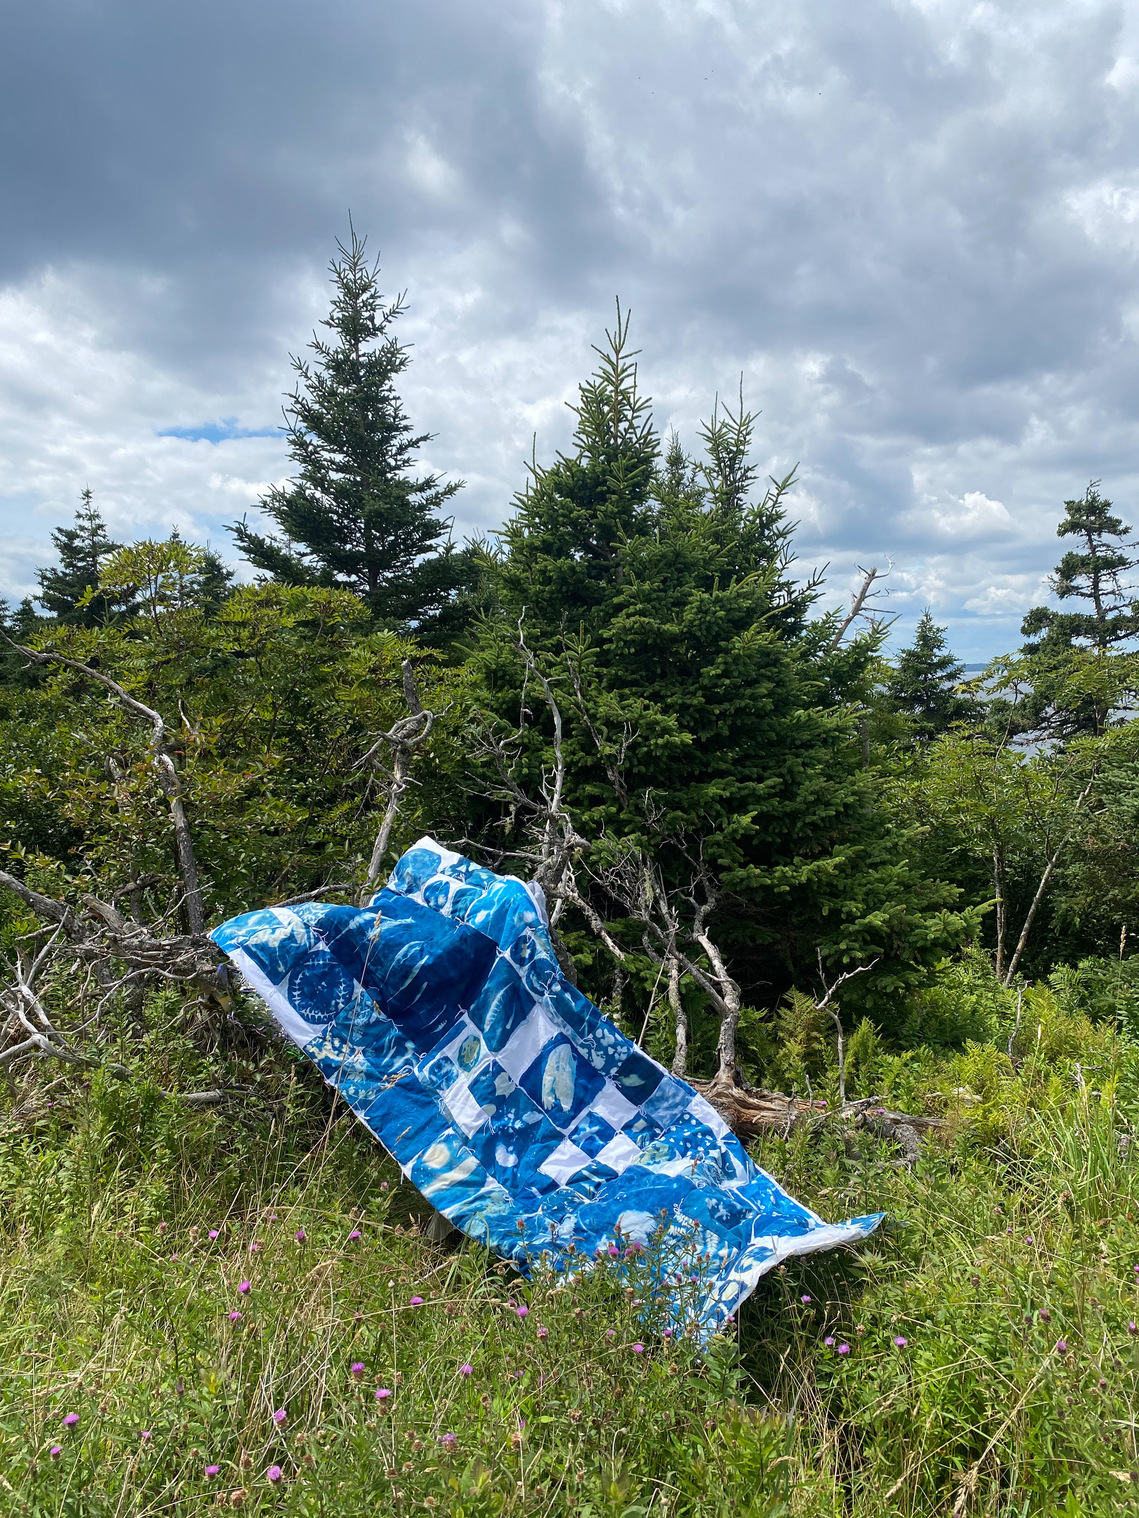 Donica's quilt, made of cyanotype prints, is draped across a fallen tree. Forest greenery and deadwood surrounds the quilt as its blue fabric shows up in vibrant contrast. There are many patches on the quilt with various prints. 